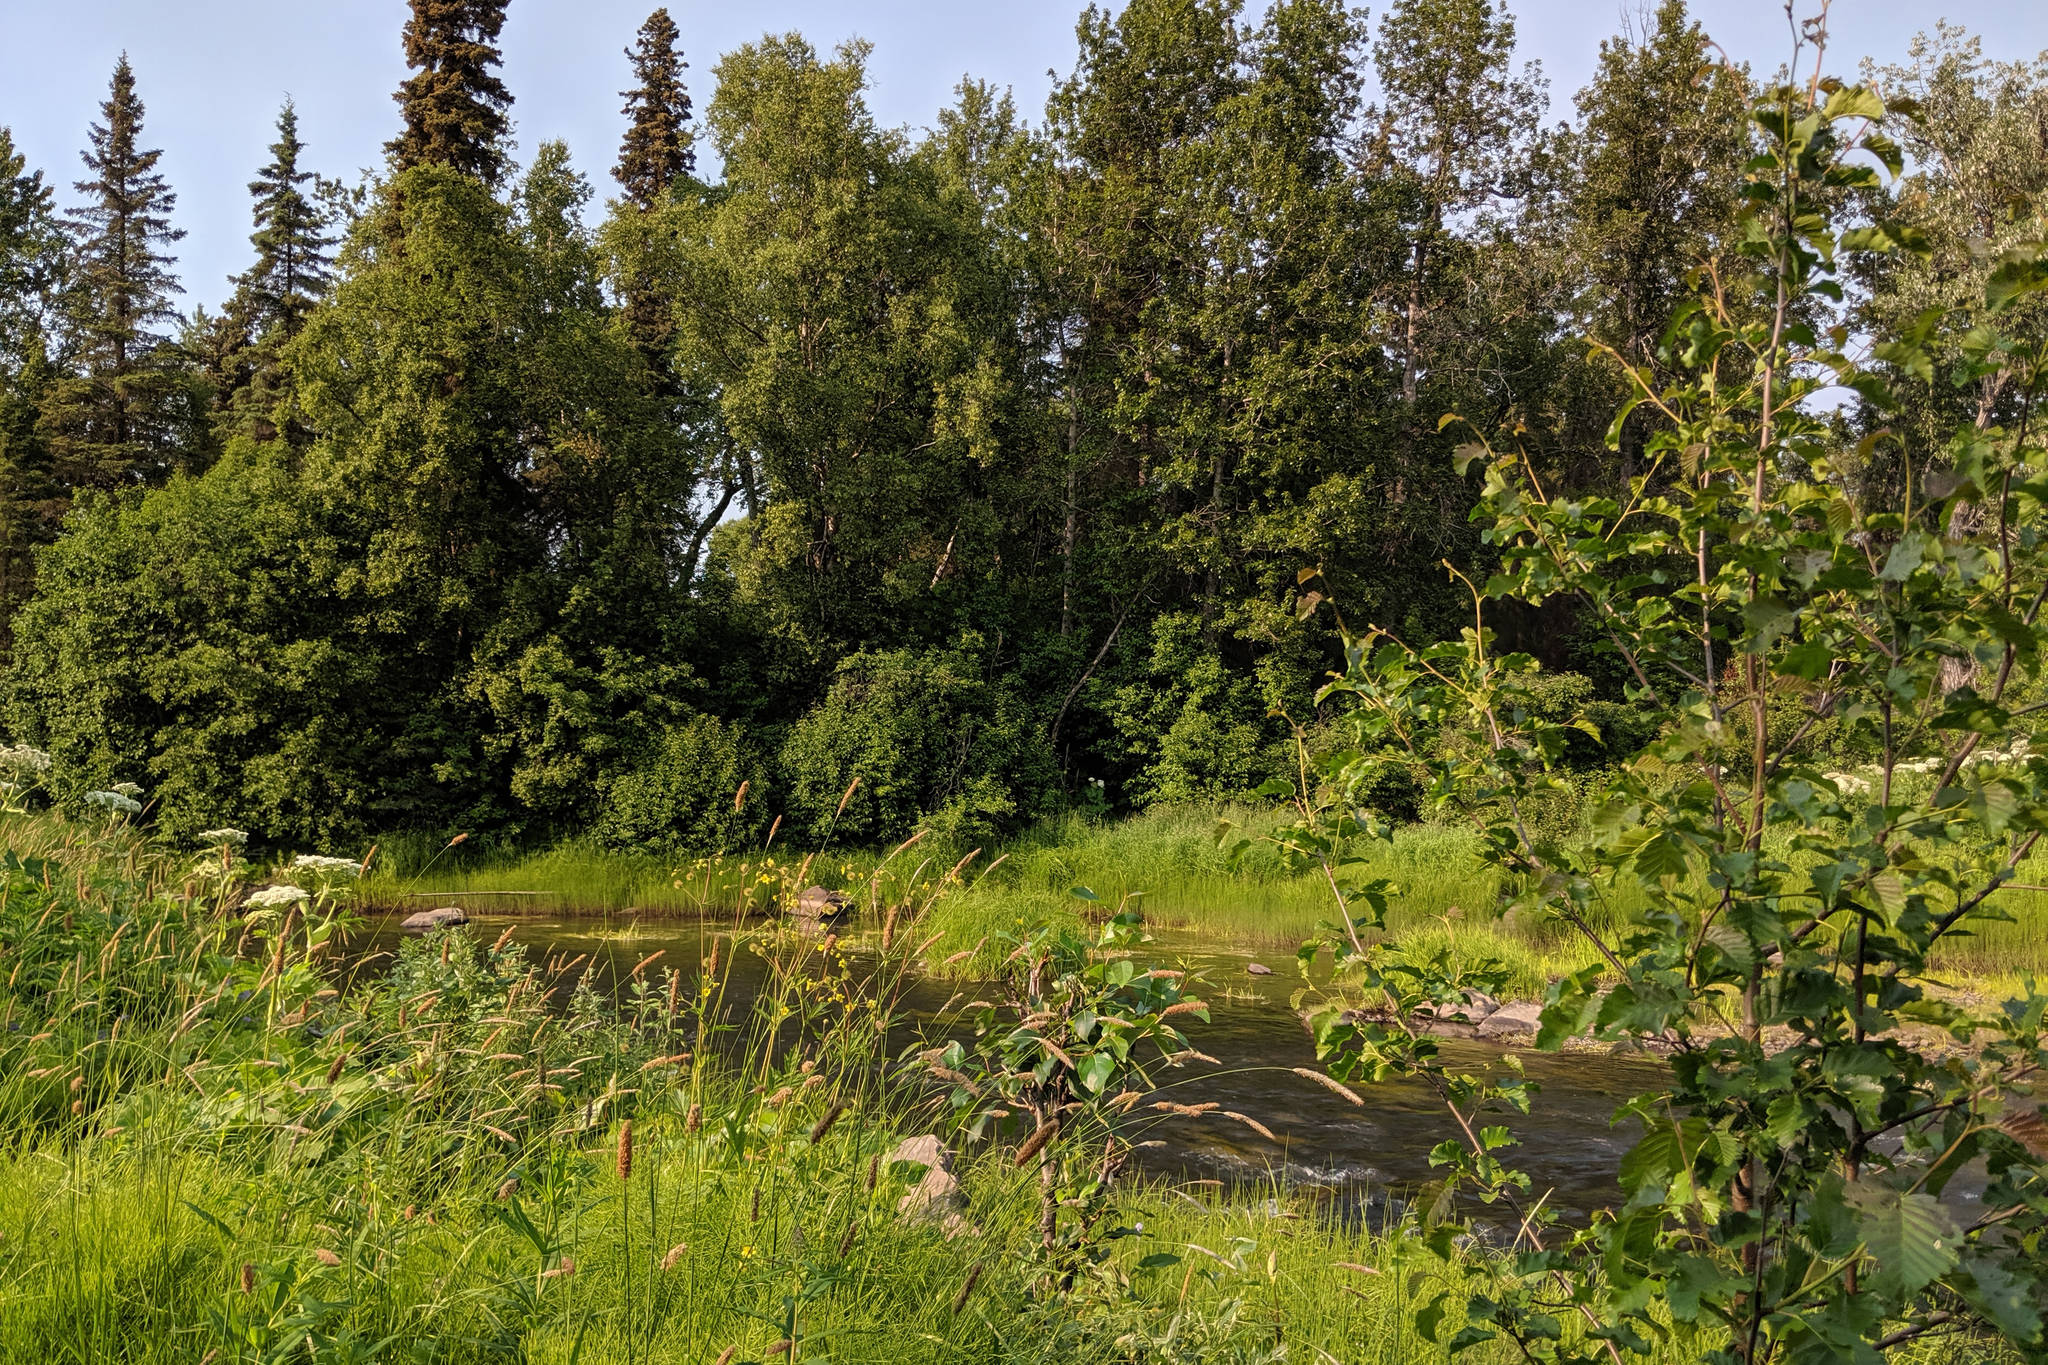 A stream runs through woods in Funny River, Alaska, in July 2019. (Photo by Erin Thompson/Peninsula Clarion)